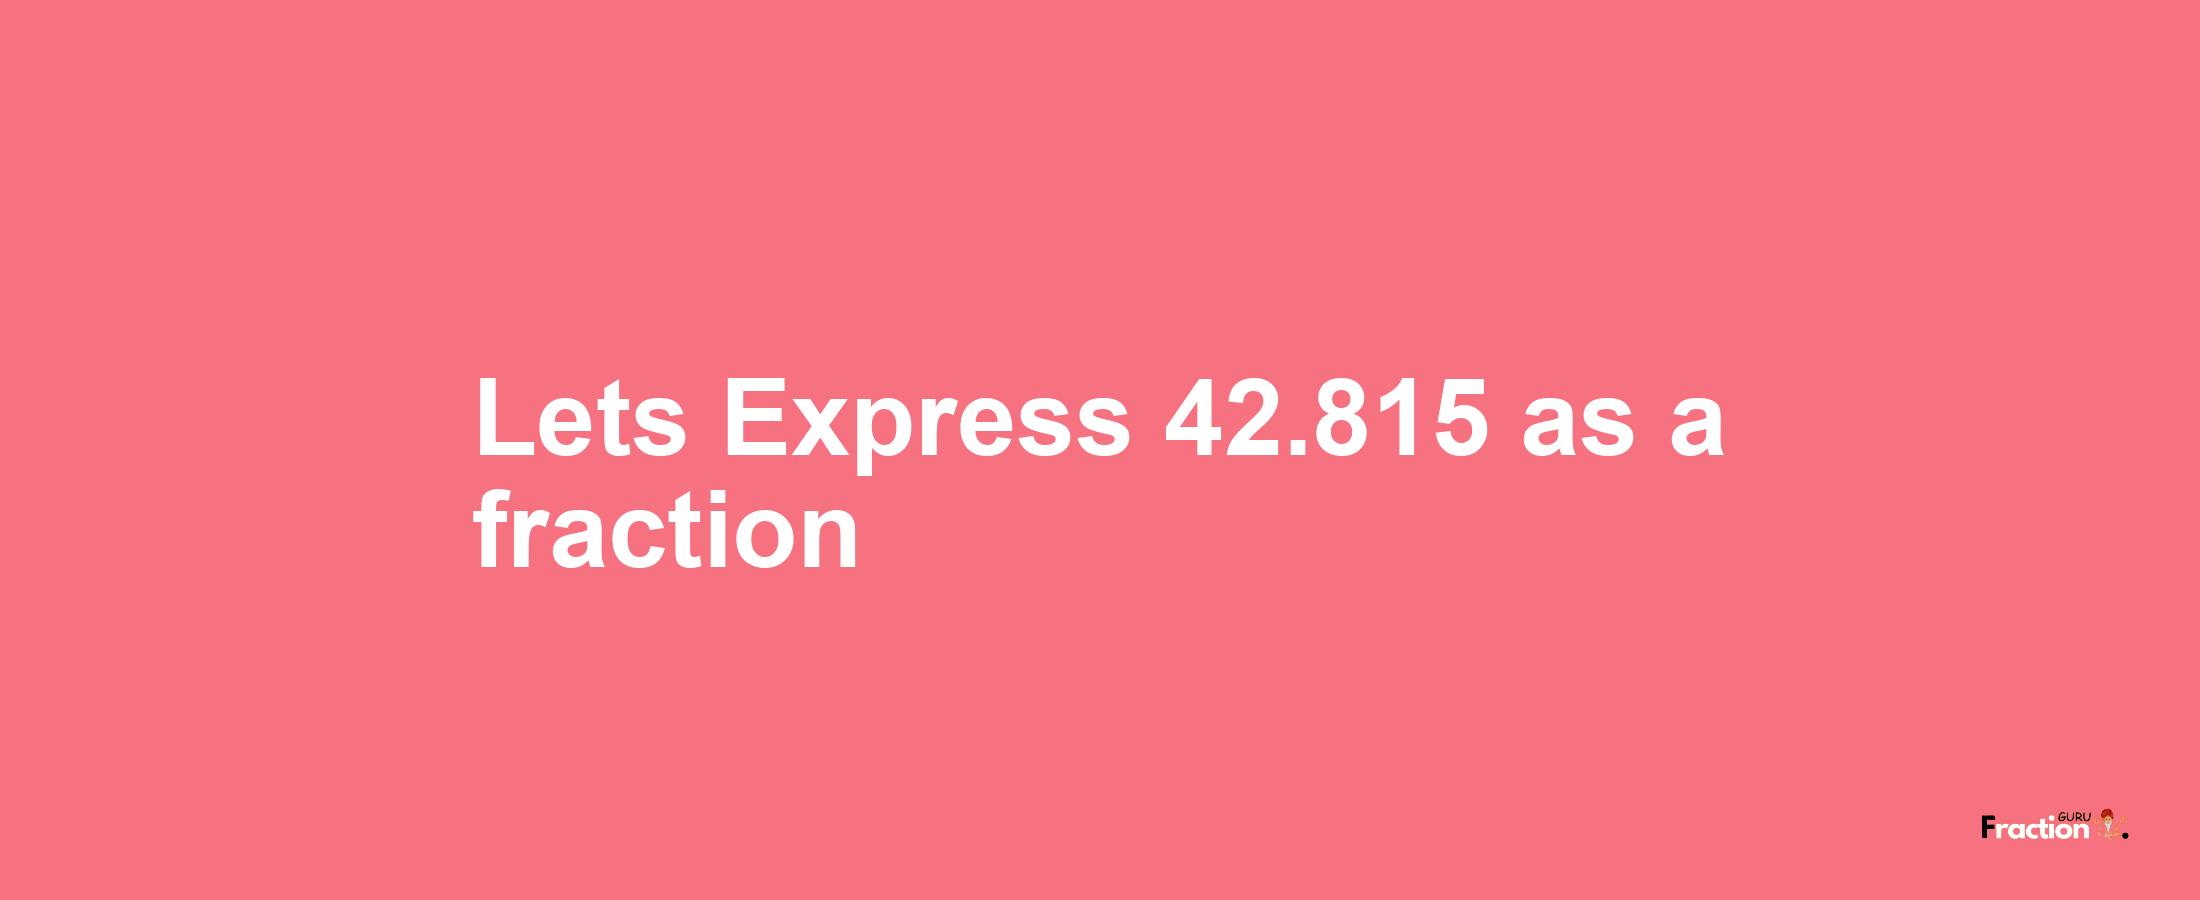 Lets Express 42.815 as afraction